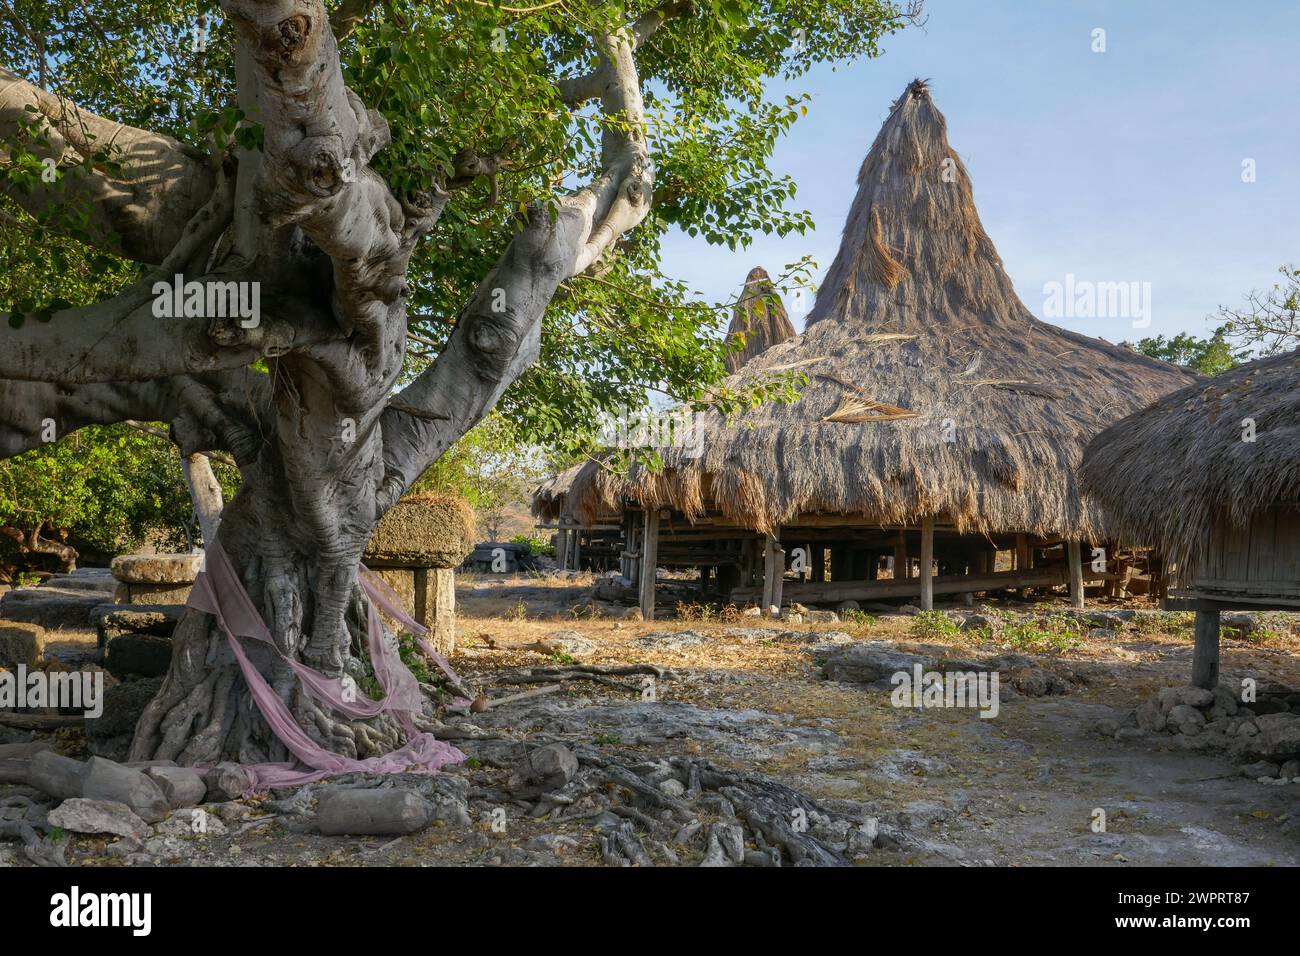 Landscape view of traditional house on stilts with thatched roof and gnarly pipal tree, Prai Liang village, Sumba, East Nusa Tenggara, Indonesia Stock Photo